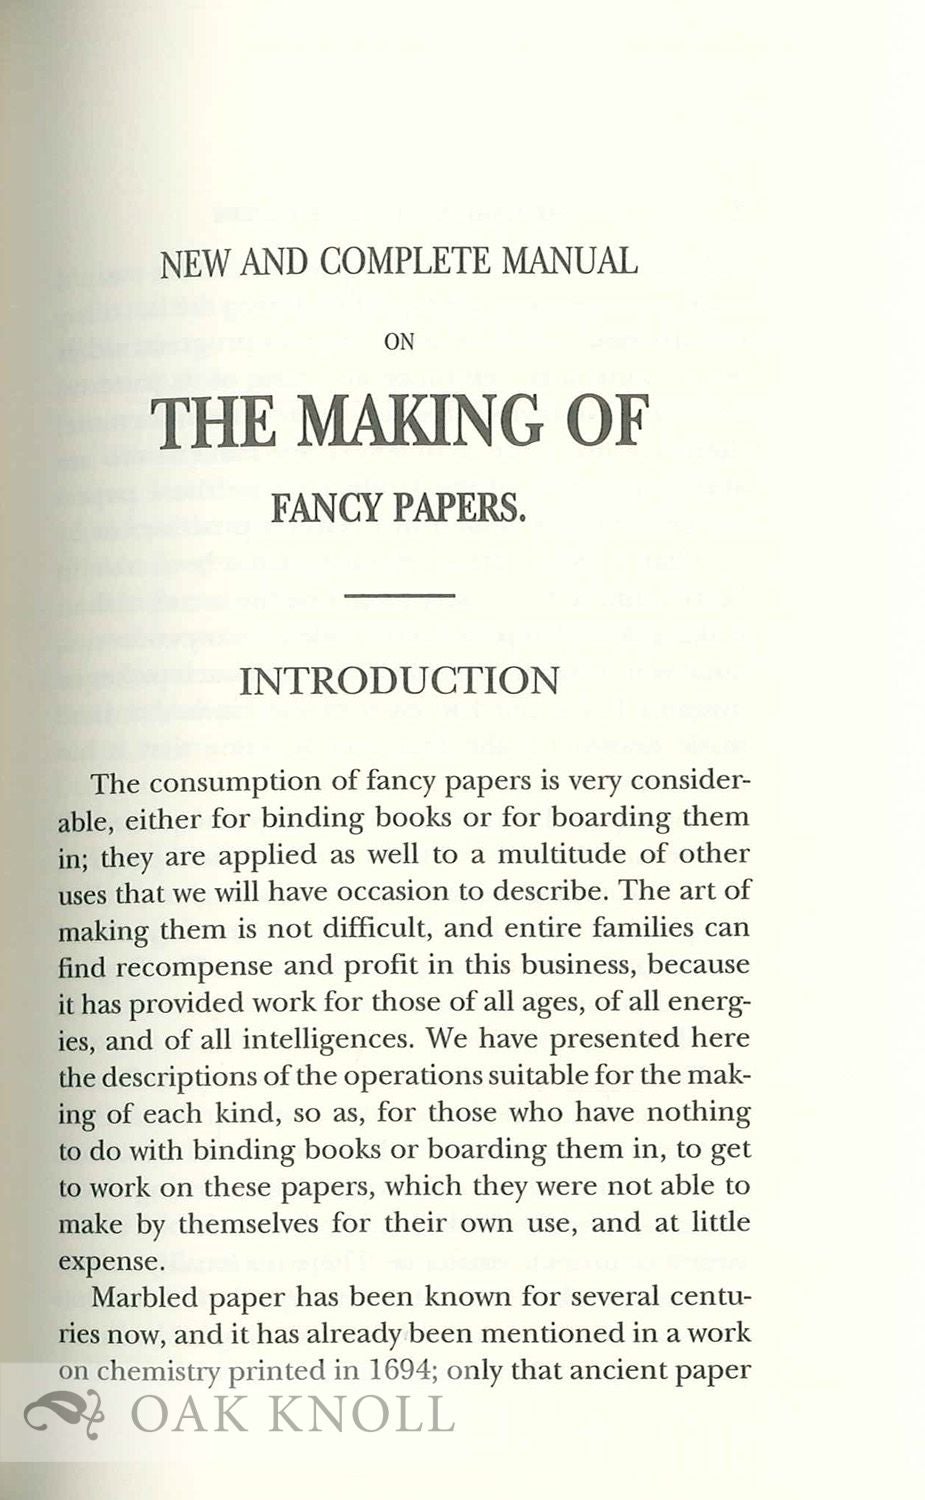 NEW AND COMPLETE MANUAL ON THE MAKING OF FANCY PAPERS BY M. FICHTENBERG by  M. Fichtenberg on Oak Knoll